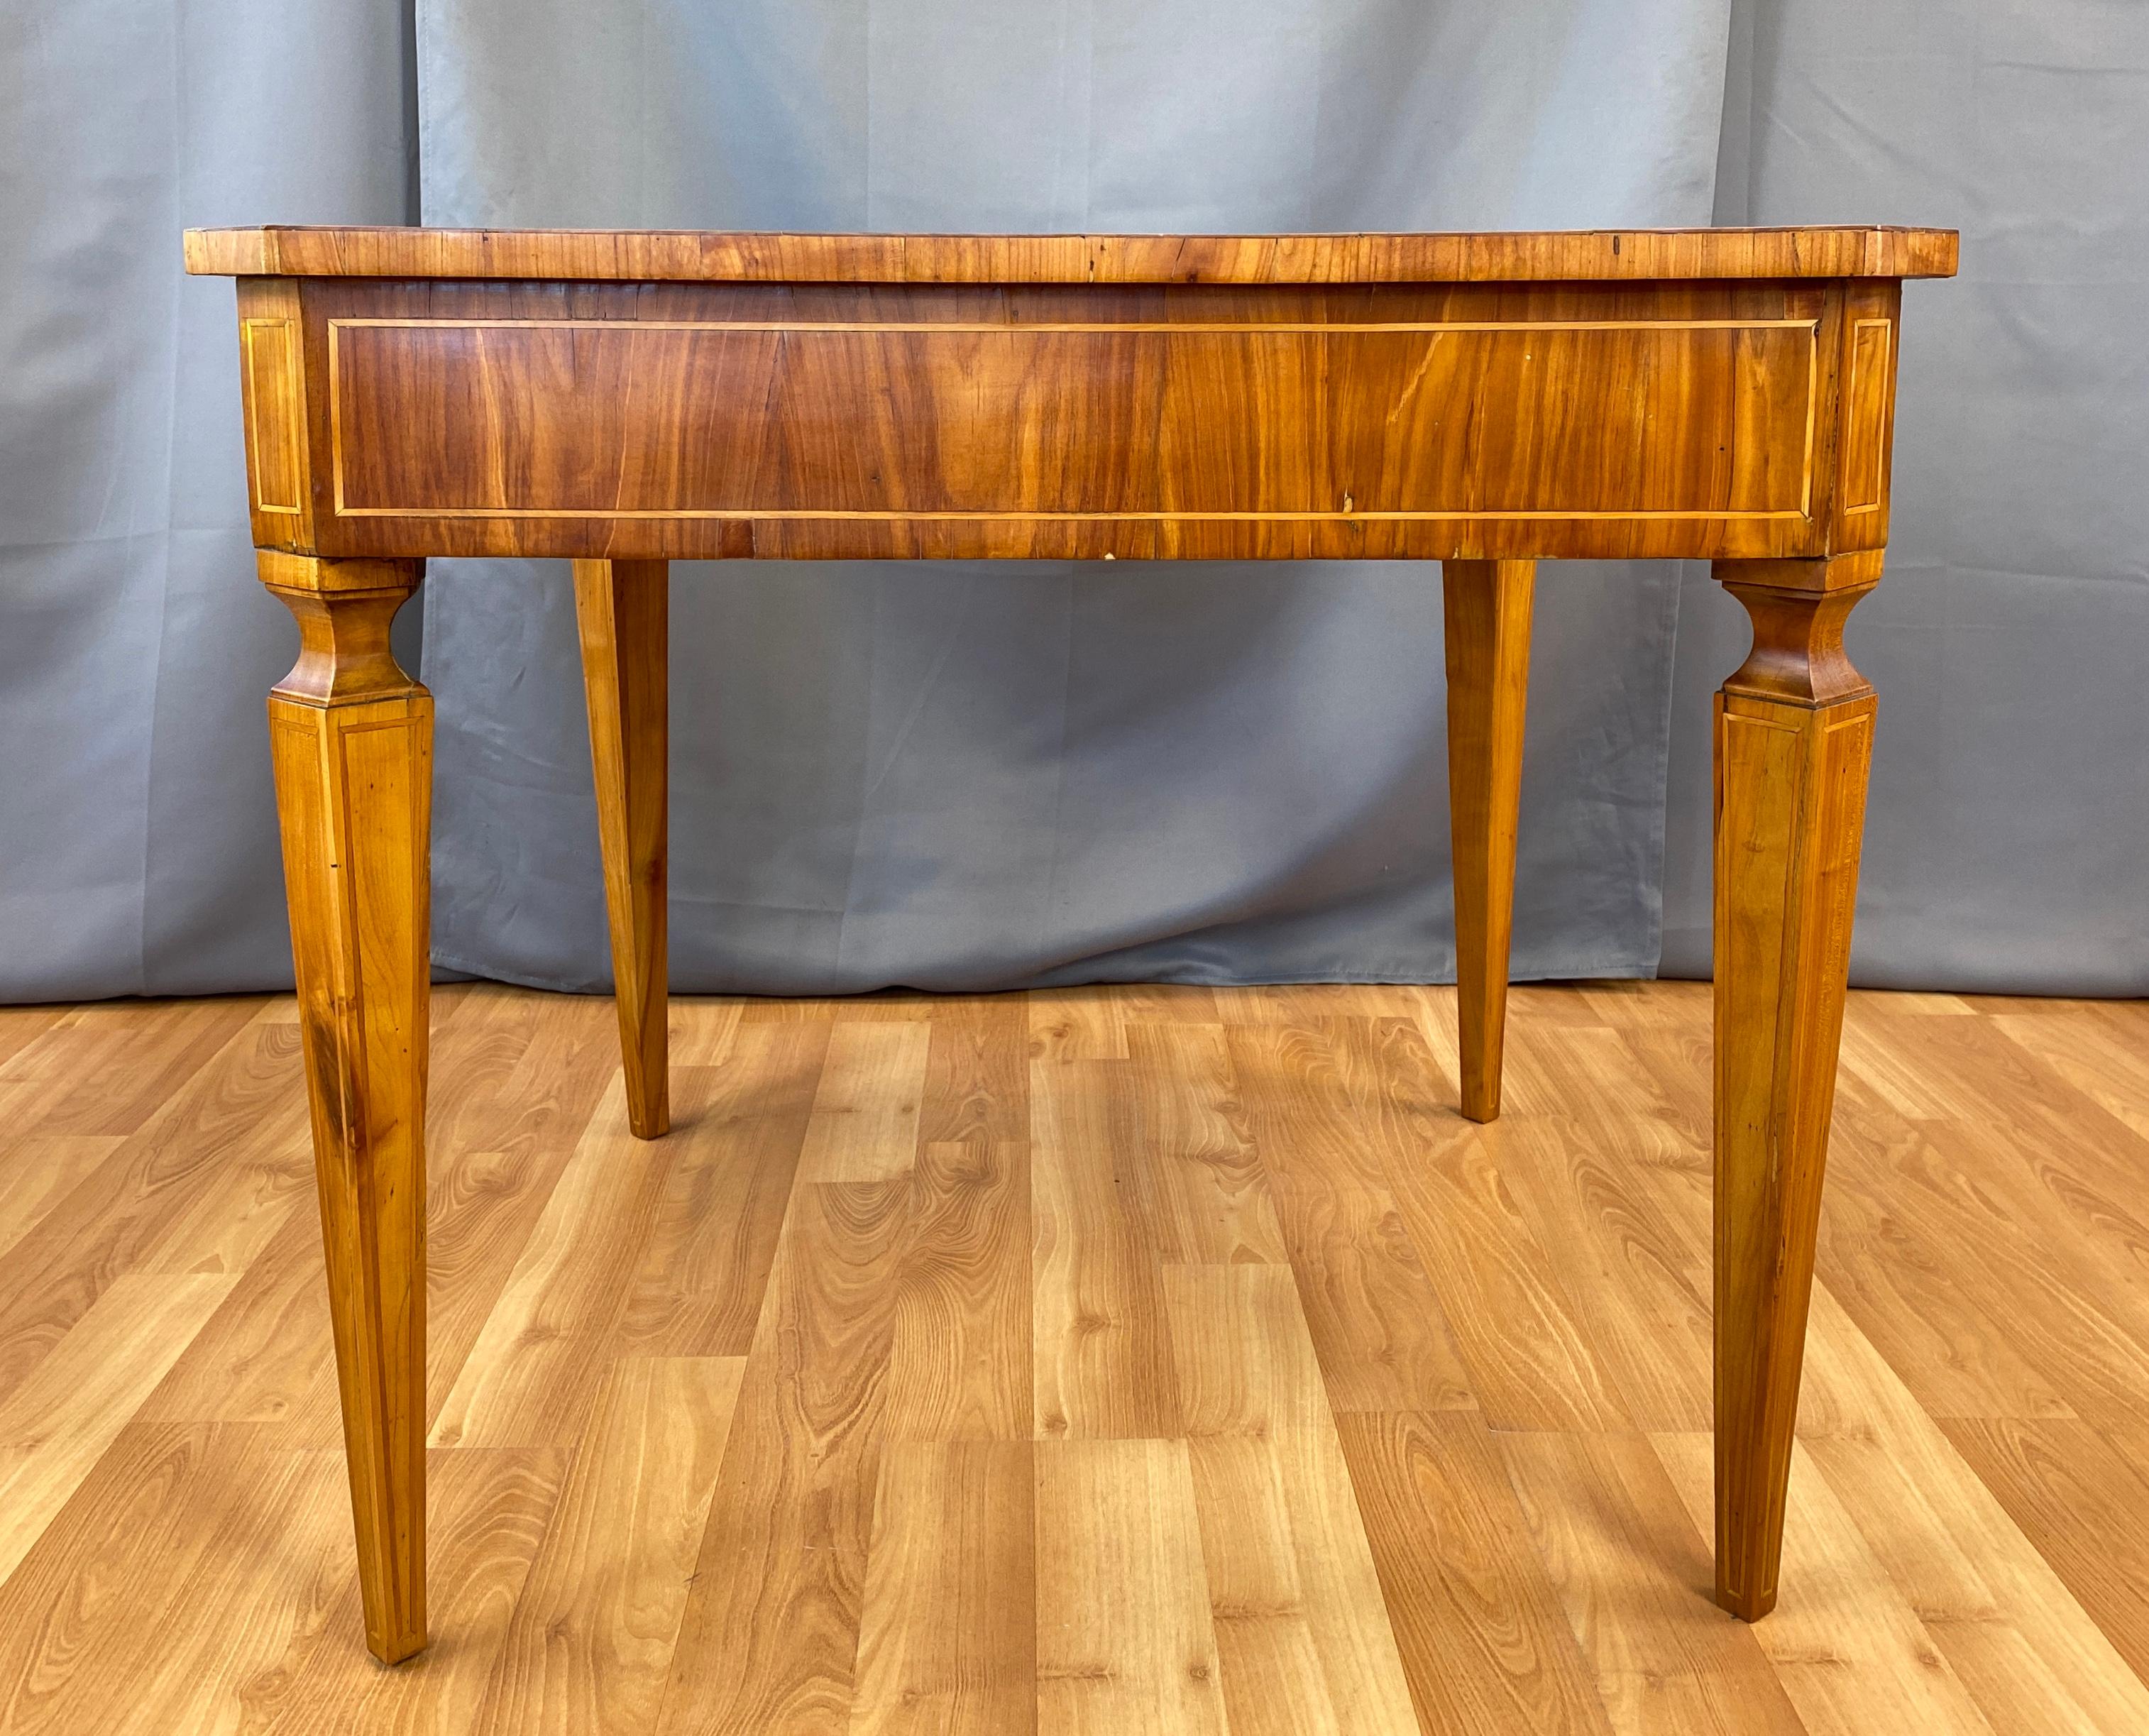 A 18th century Italian marquetry Cherry table with a single drawer.
Exquisitely handcrafted writing or gaming table, inlaid from it's top down it's legs that are slender and tapered. 
Table has wonderful proportions, and a beautifully warm patina